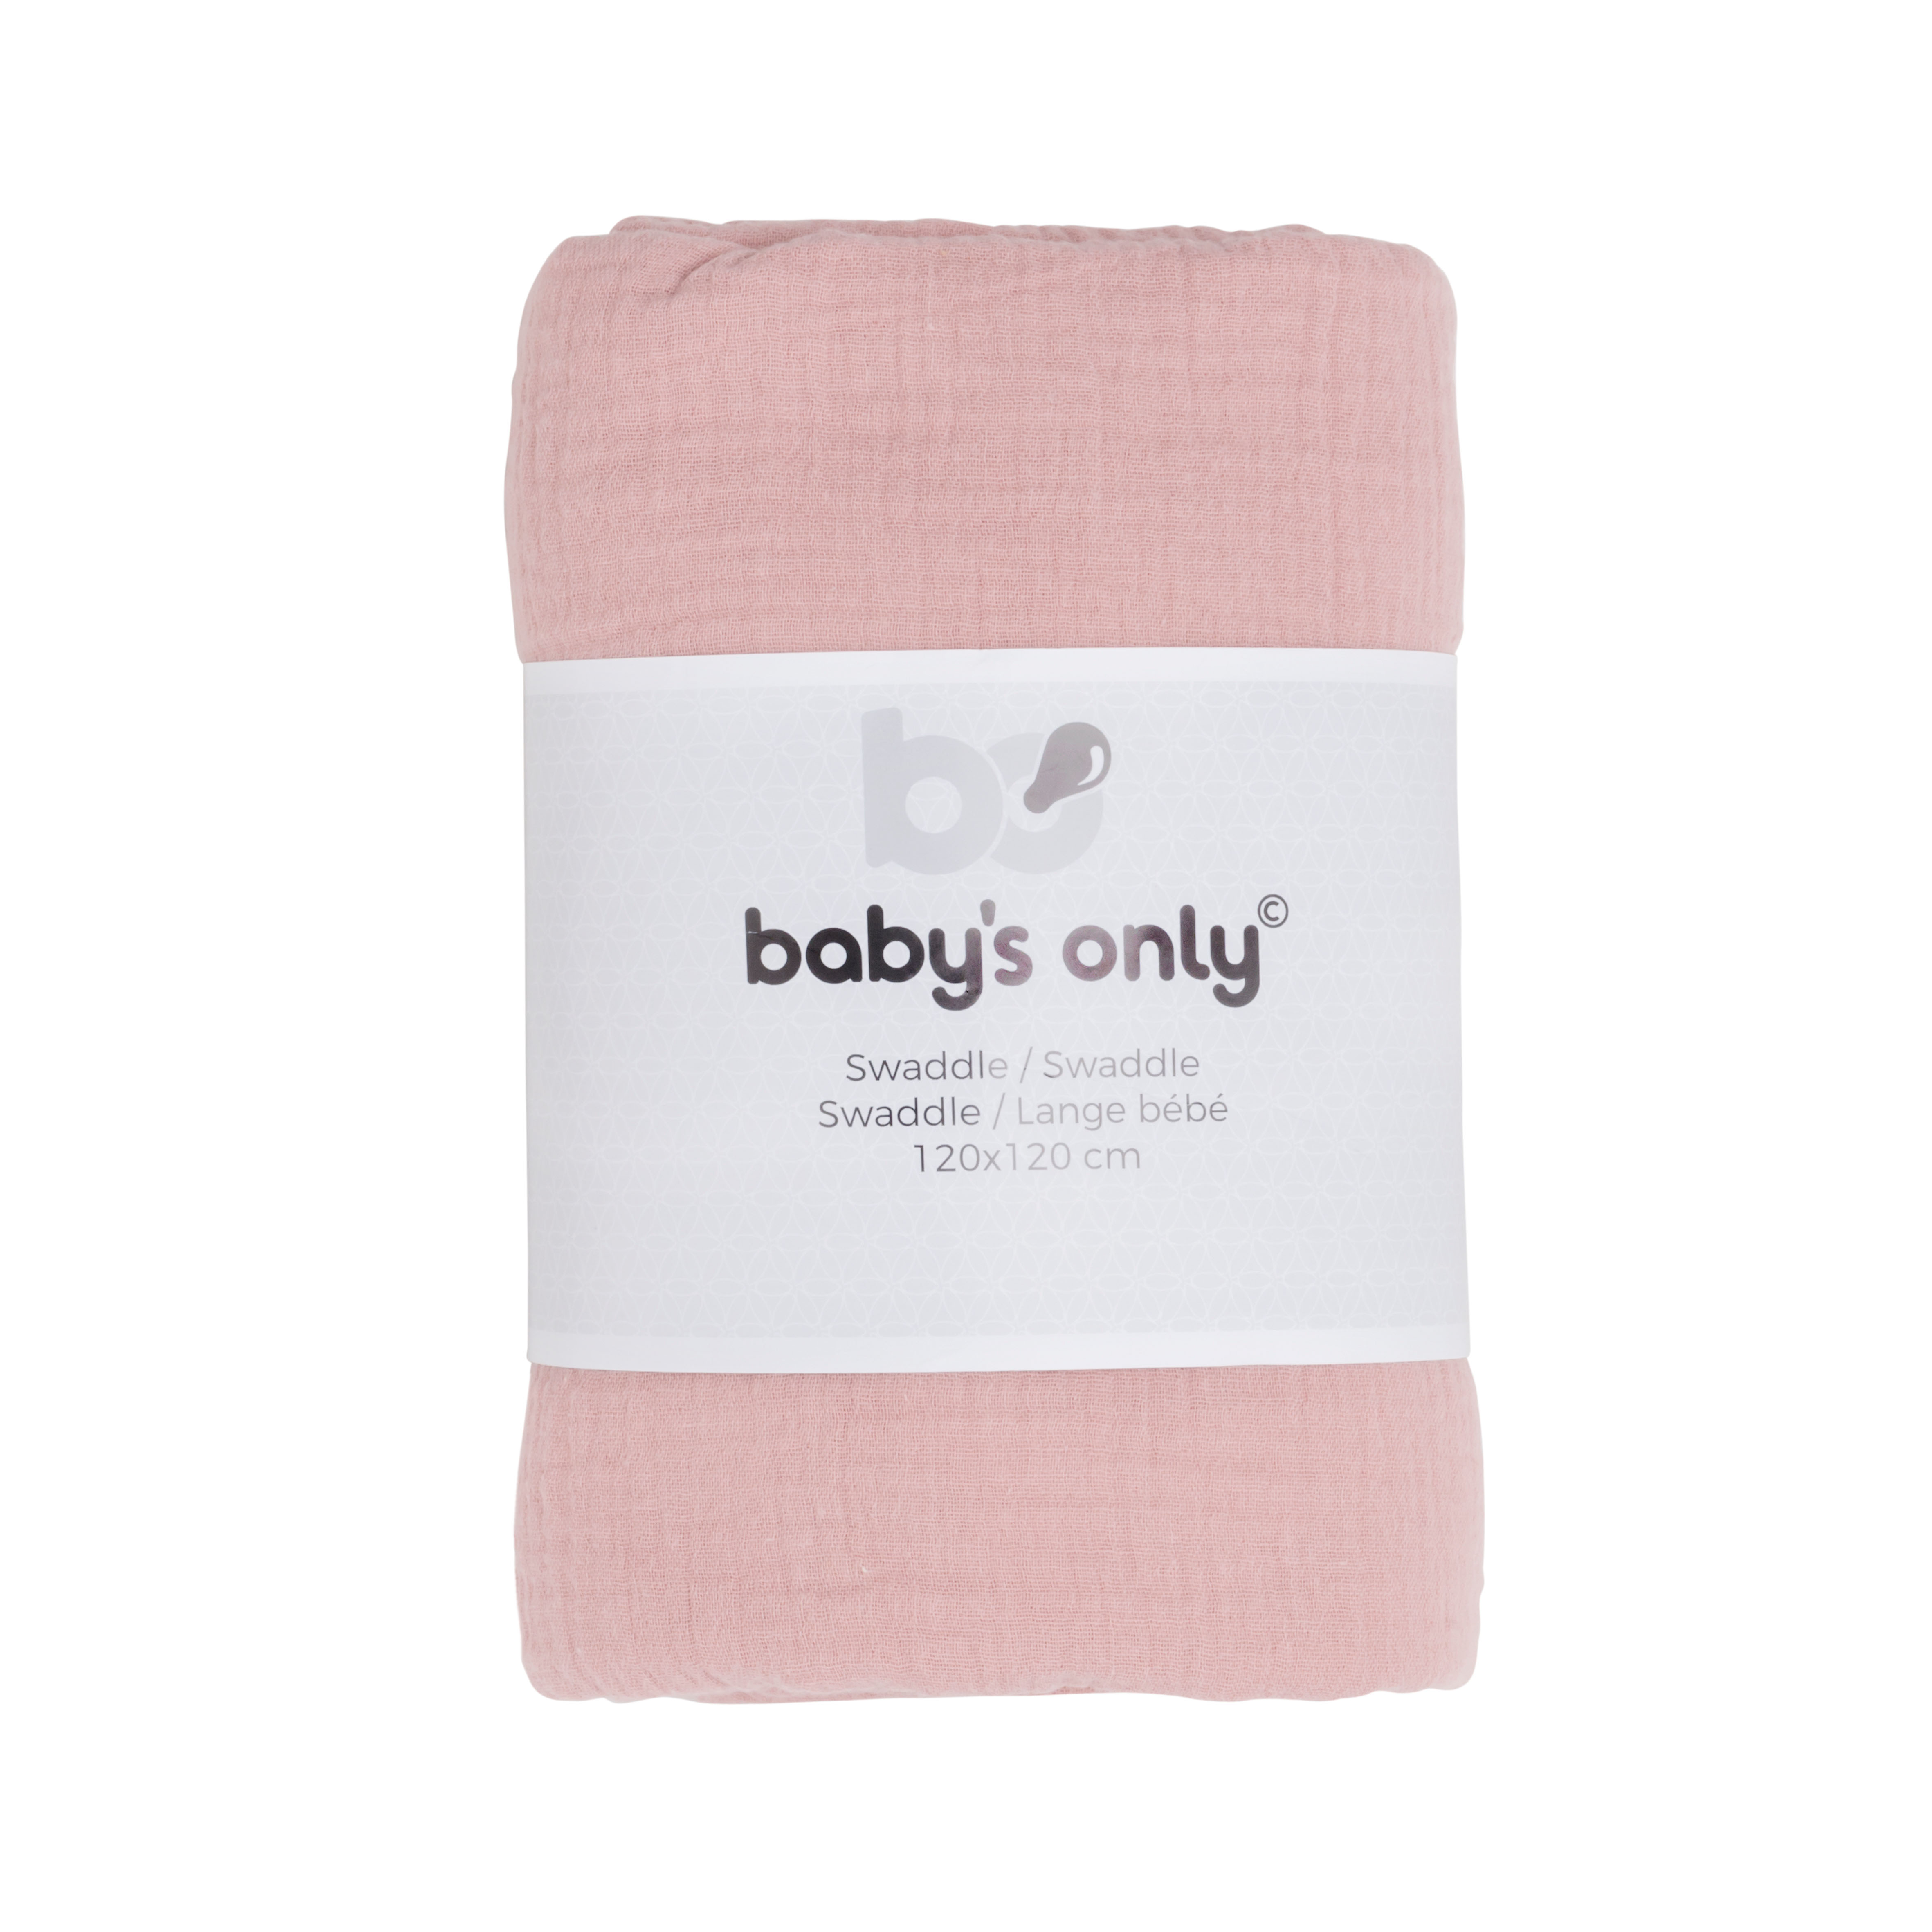 Swaddle Breeze old pink - 120x120